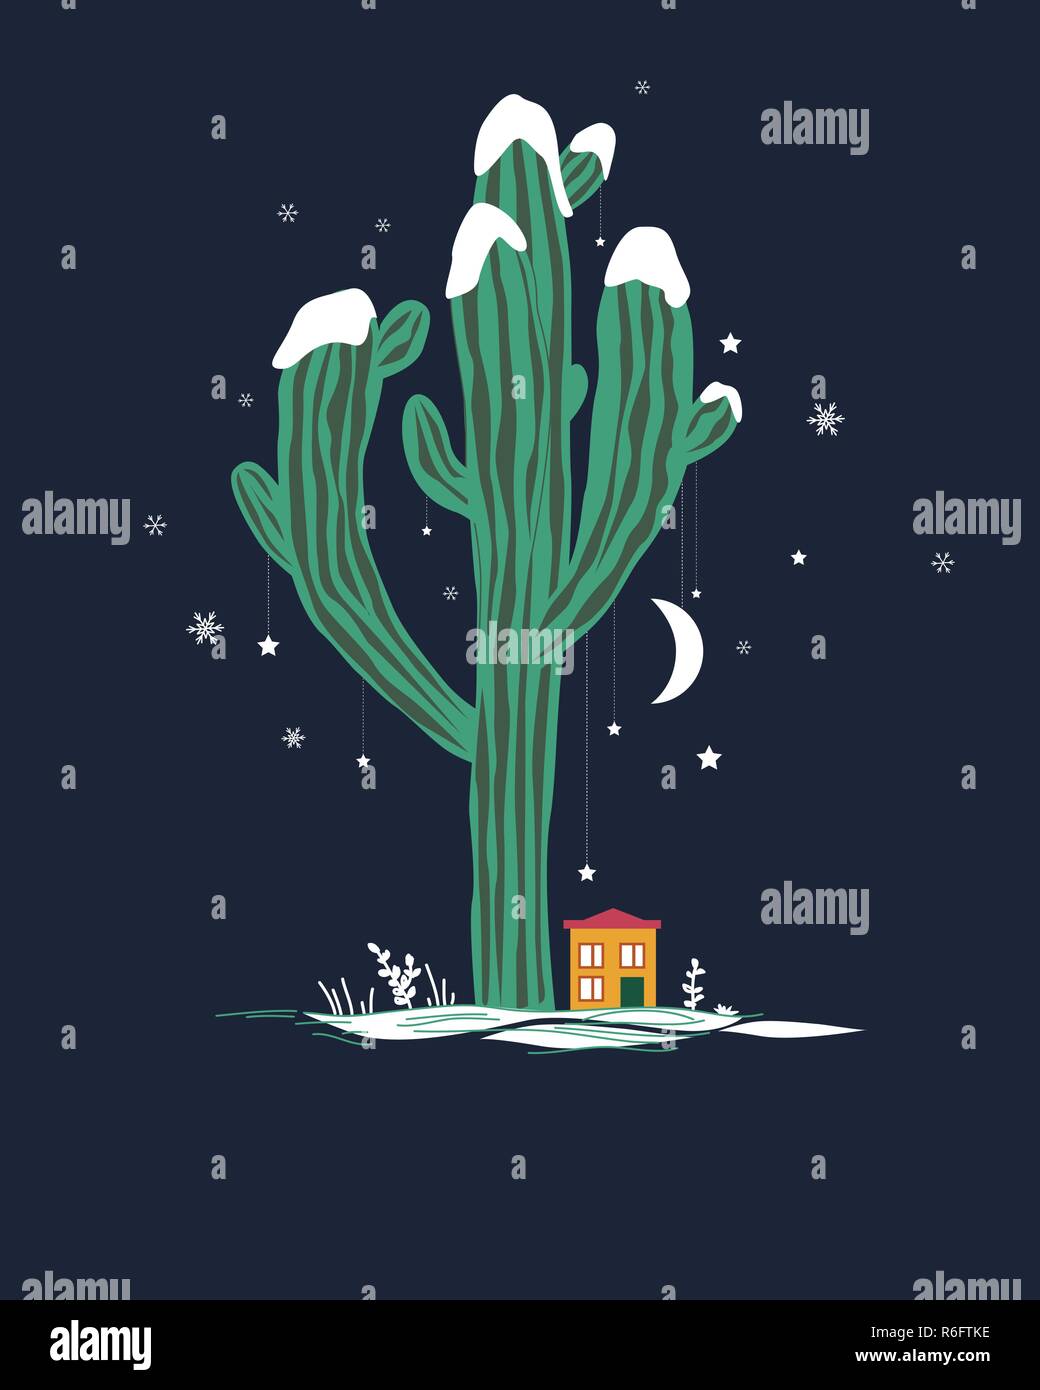 Cute cartoon illustration with high saguaro cactus and liitle house. Mexican fairy winter landscape, Christmas card. Stock Vector